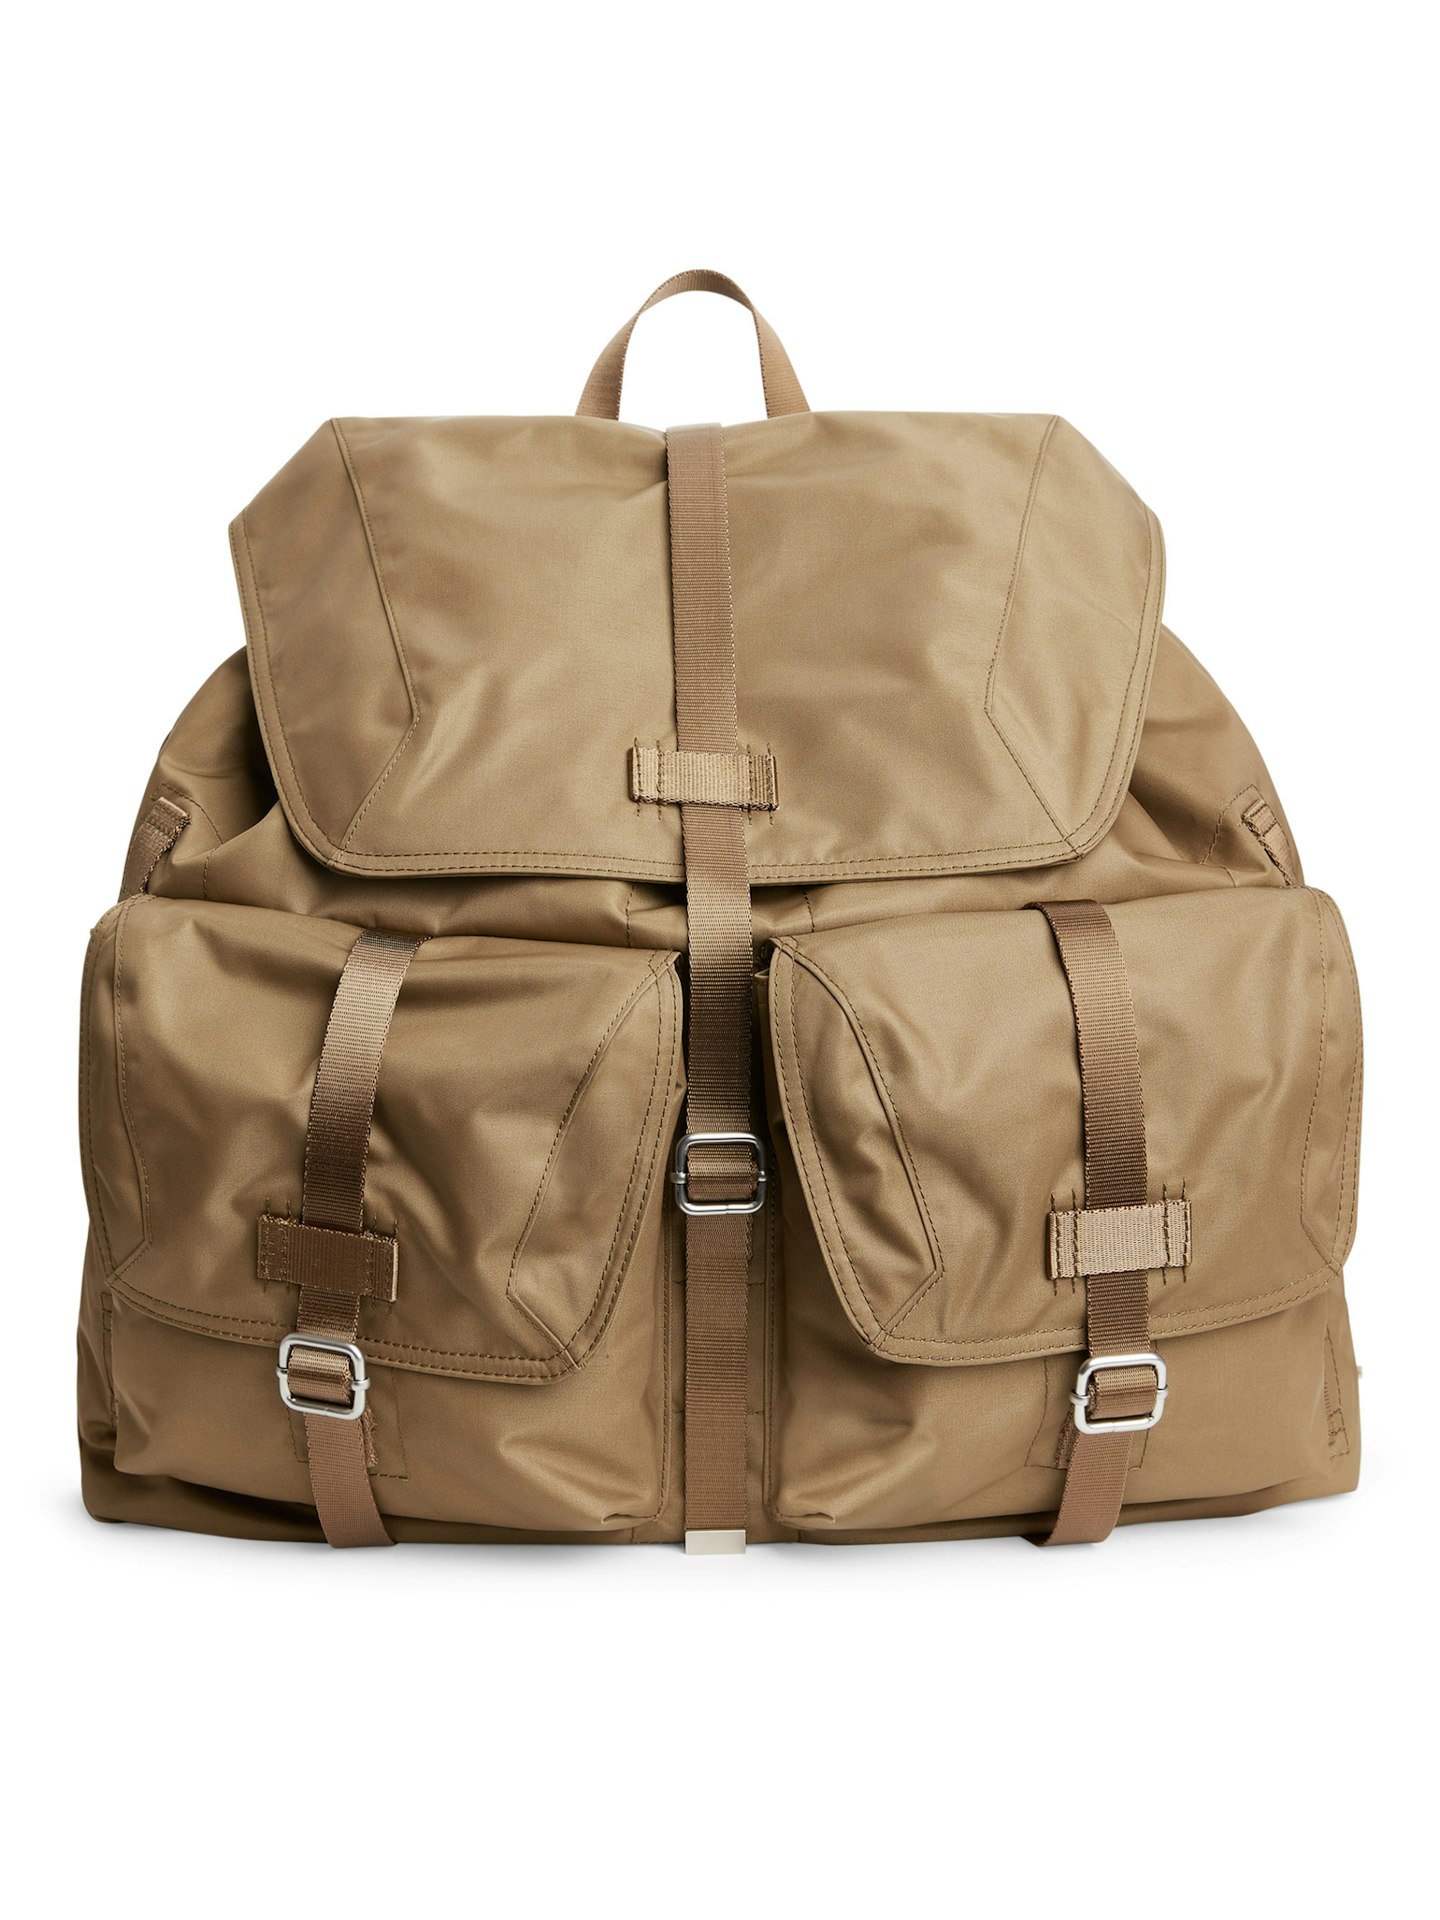 Nylon parachute backpack by Arket, £99